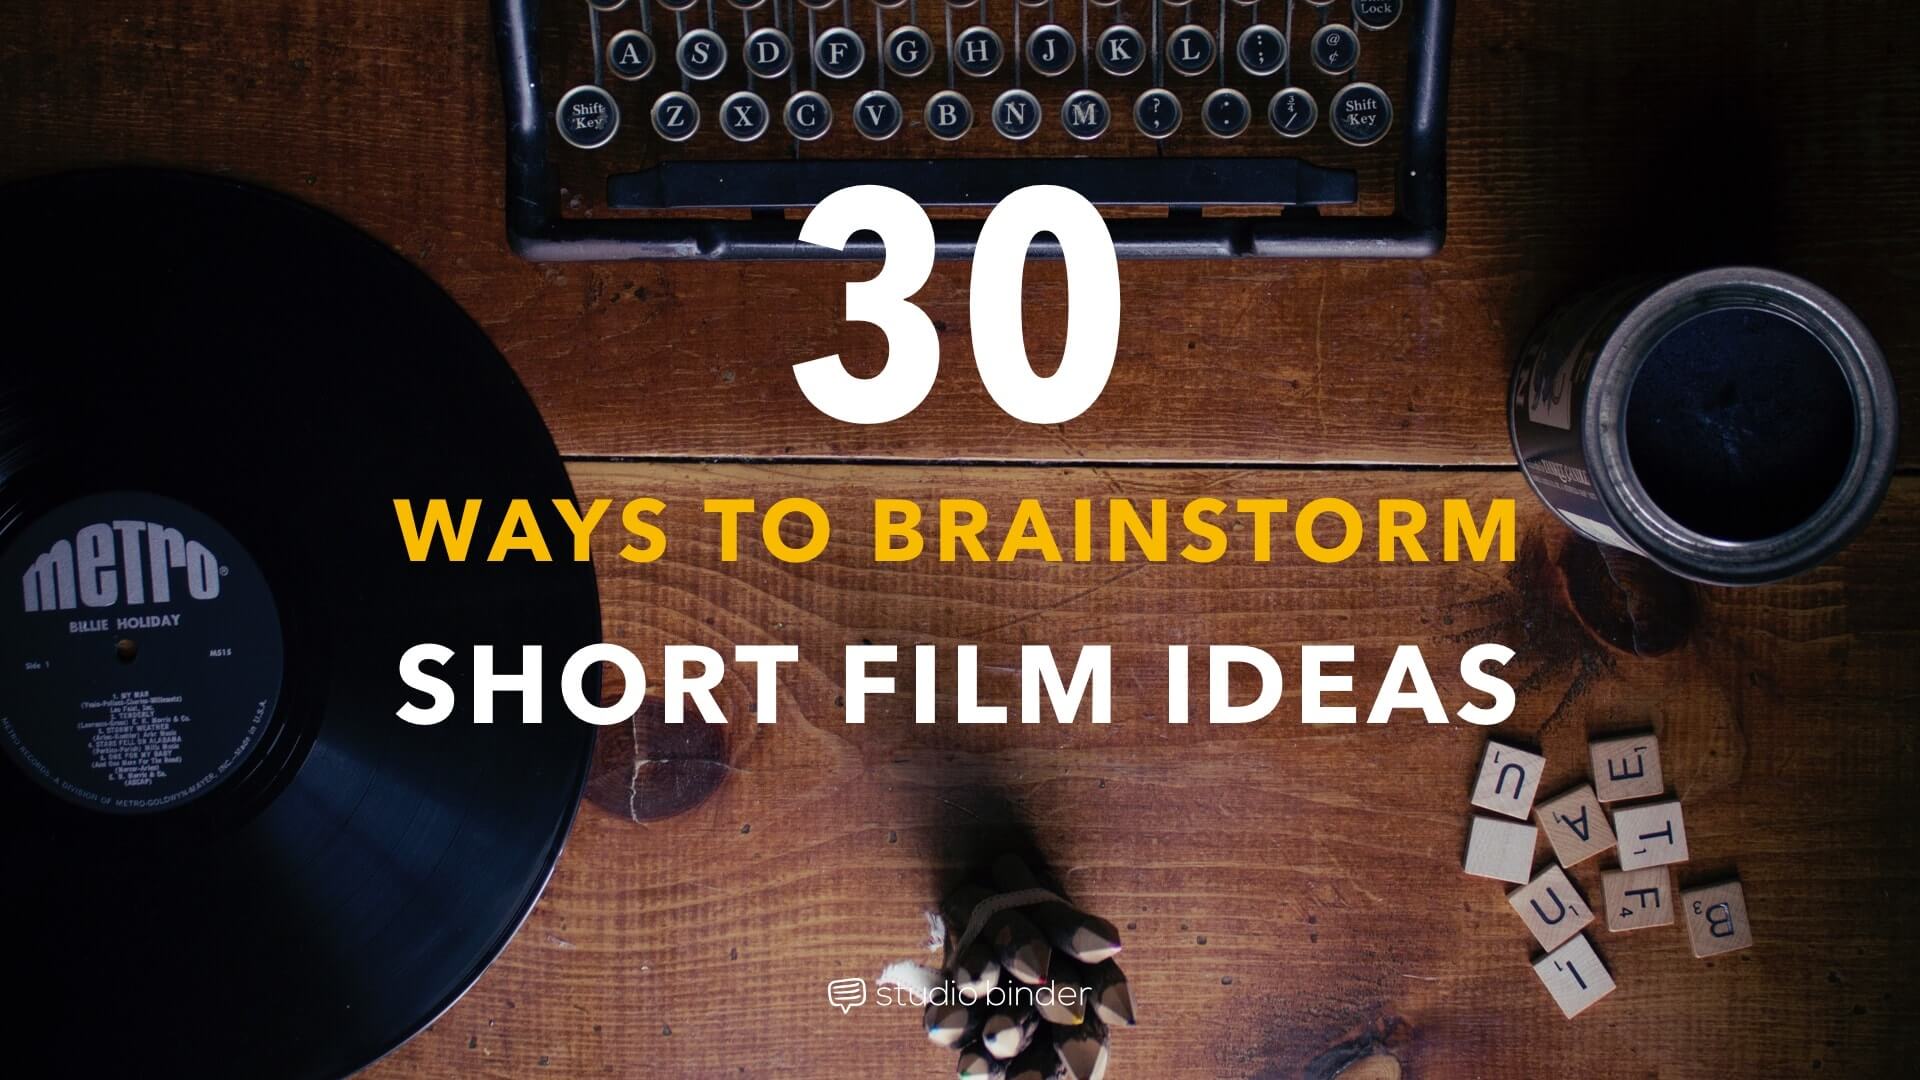 30 ways to brainstorm short film ideas you can actually produce